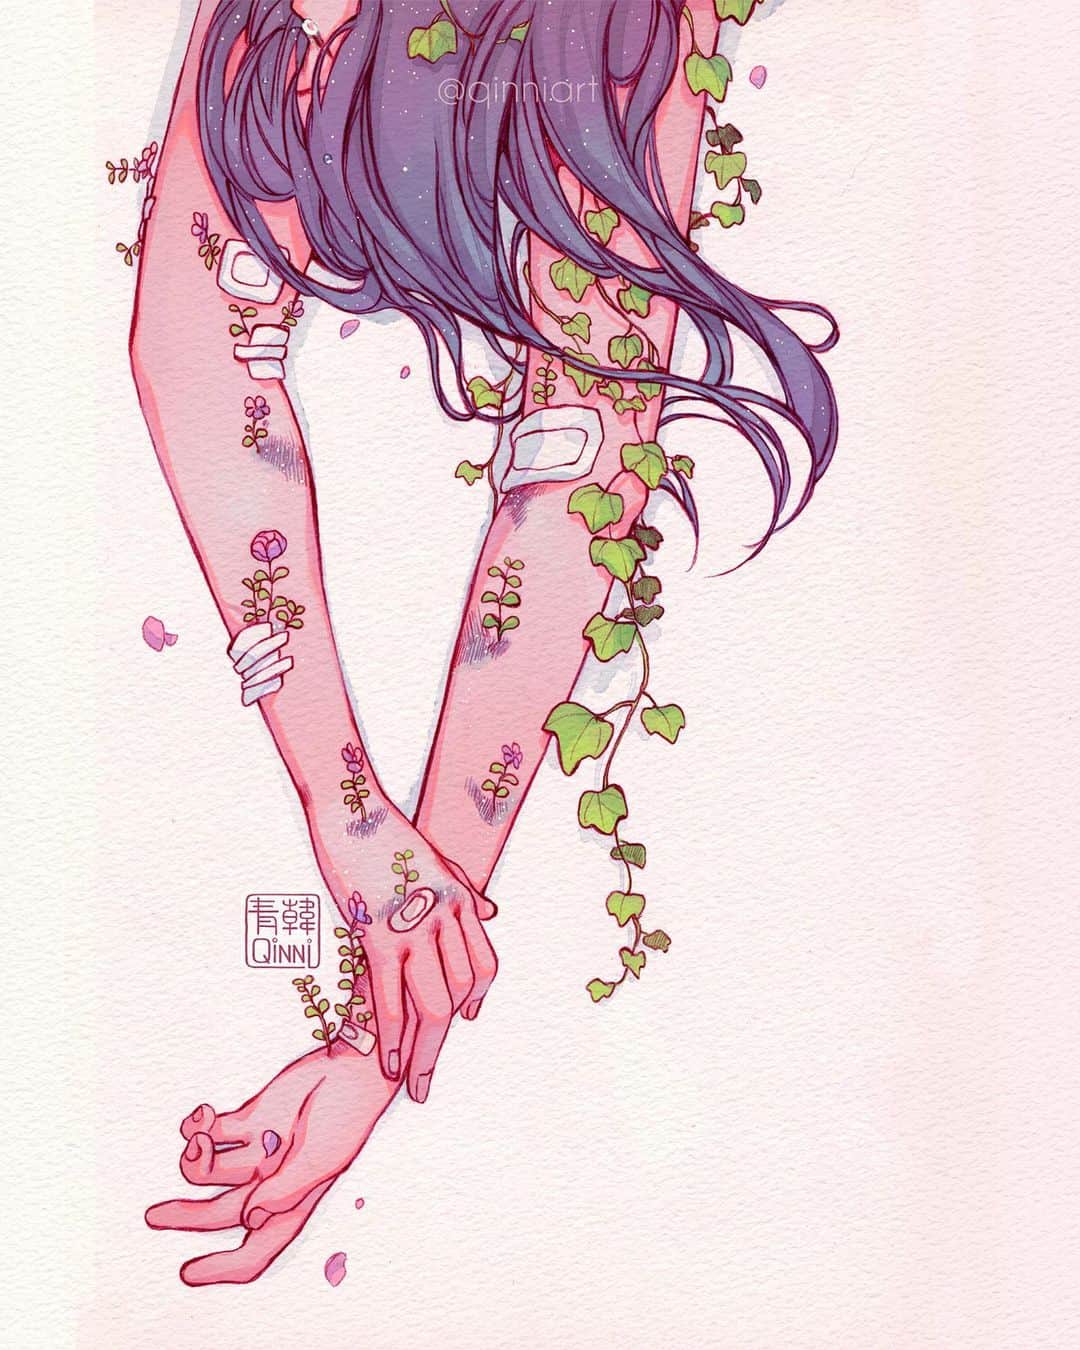 Qing Hanのインスタグラム：「[Flowering Wounds] • Sometimes I like to pretend my blue and purple hospital bruises are little galaxies 🌌 • • //health update// So I haven't really been updating things here on insta, sorry; it's just easier to update stuff on twitter and patreon xD;;. Basically I had my first chemo session; it made my body have some pretty bad fluid retention, so I ended up gaining about 7kg of liquid in my body and they had to transfer me to the emergency room. It took about a week for them to finally remove this liquid cyst that my body gained from the chemo, and the liquid was 2L lmao. I was in so much pain for a week it's kinda ridiculous tbh.... but yeah, I got discharged from the hospital last week and my next round of chemo is coming up next week. I hope there's no repeat of what happened omfg D;;;. docs said they're gonna be a lot more careful about fluid retention this time so...fingers crossed >__<~ but hey, I'm still alive! yay. xD」